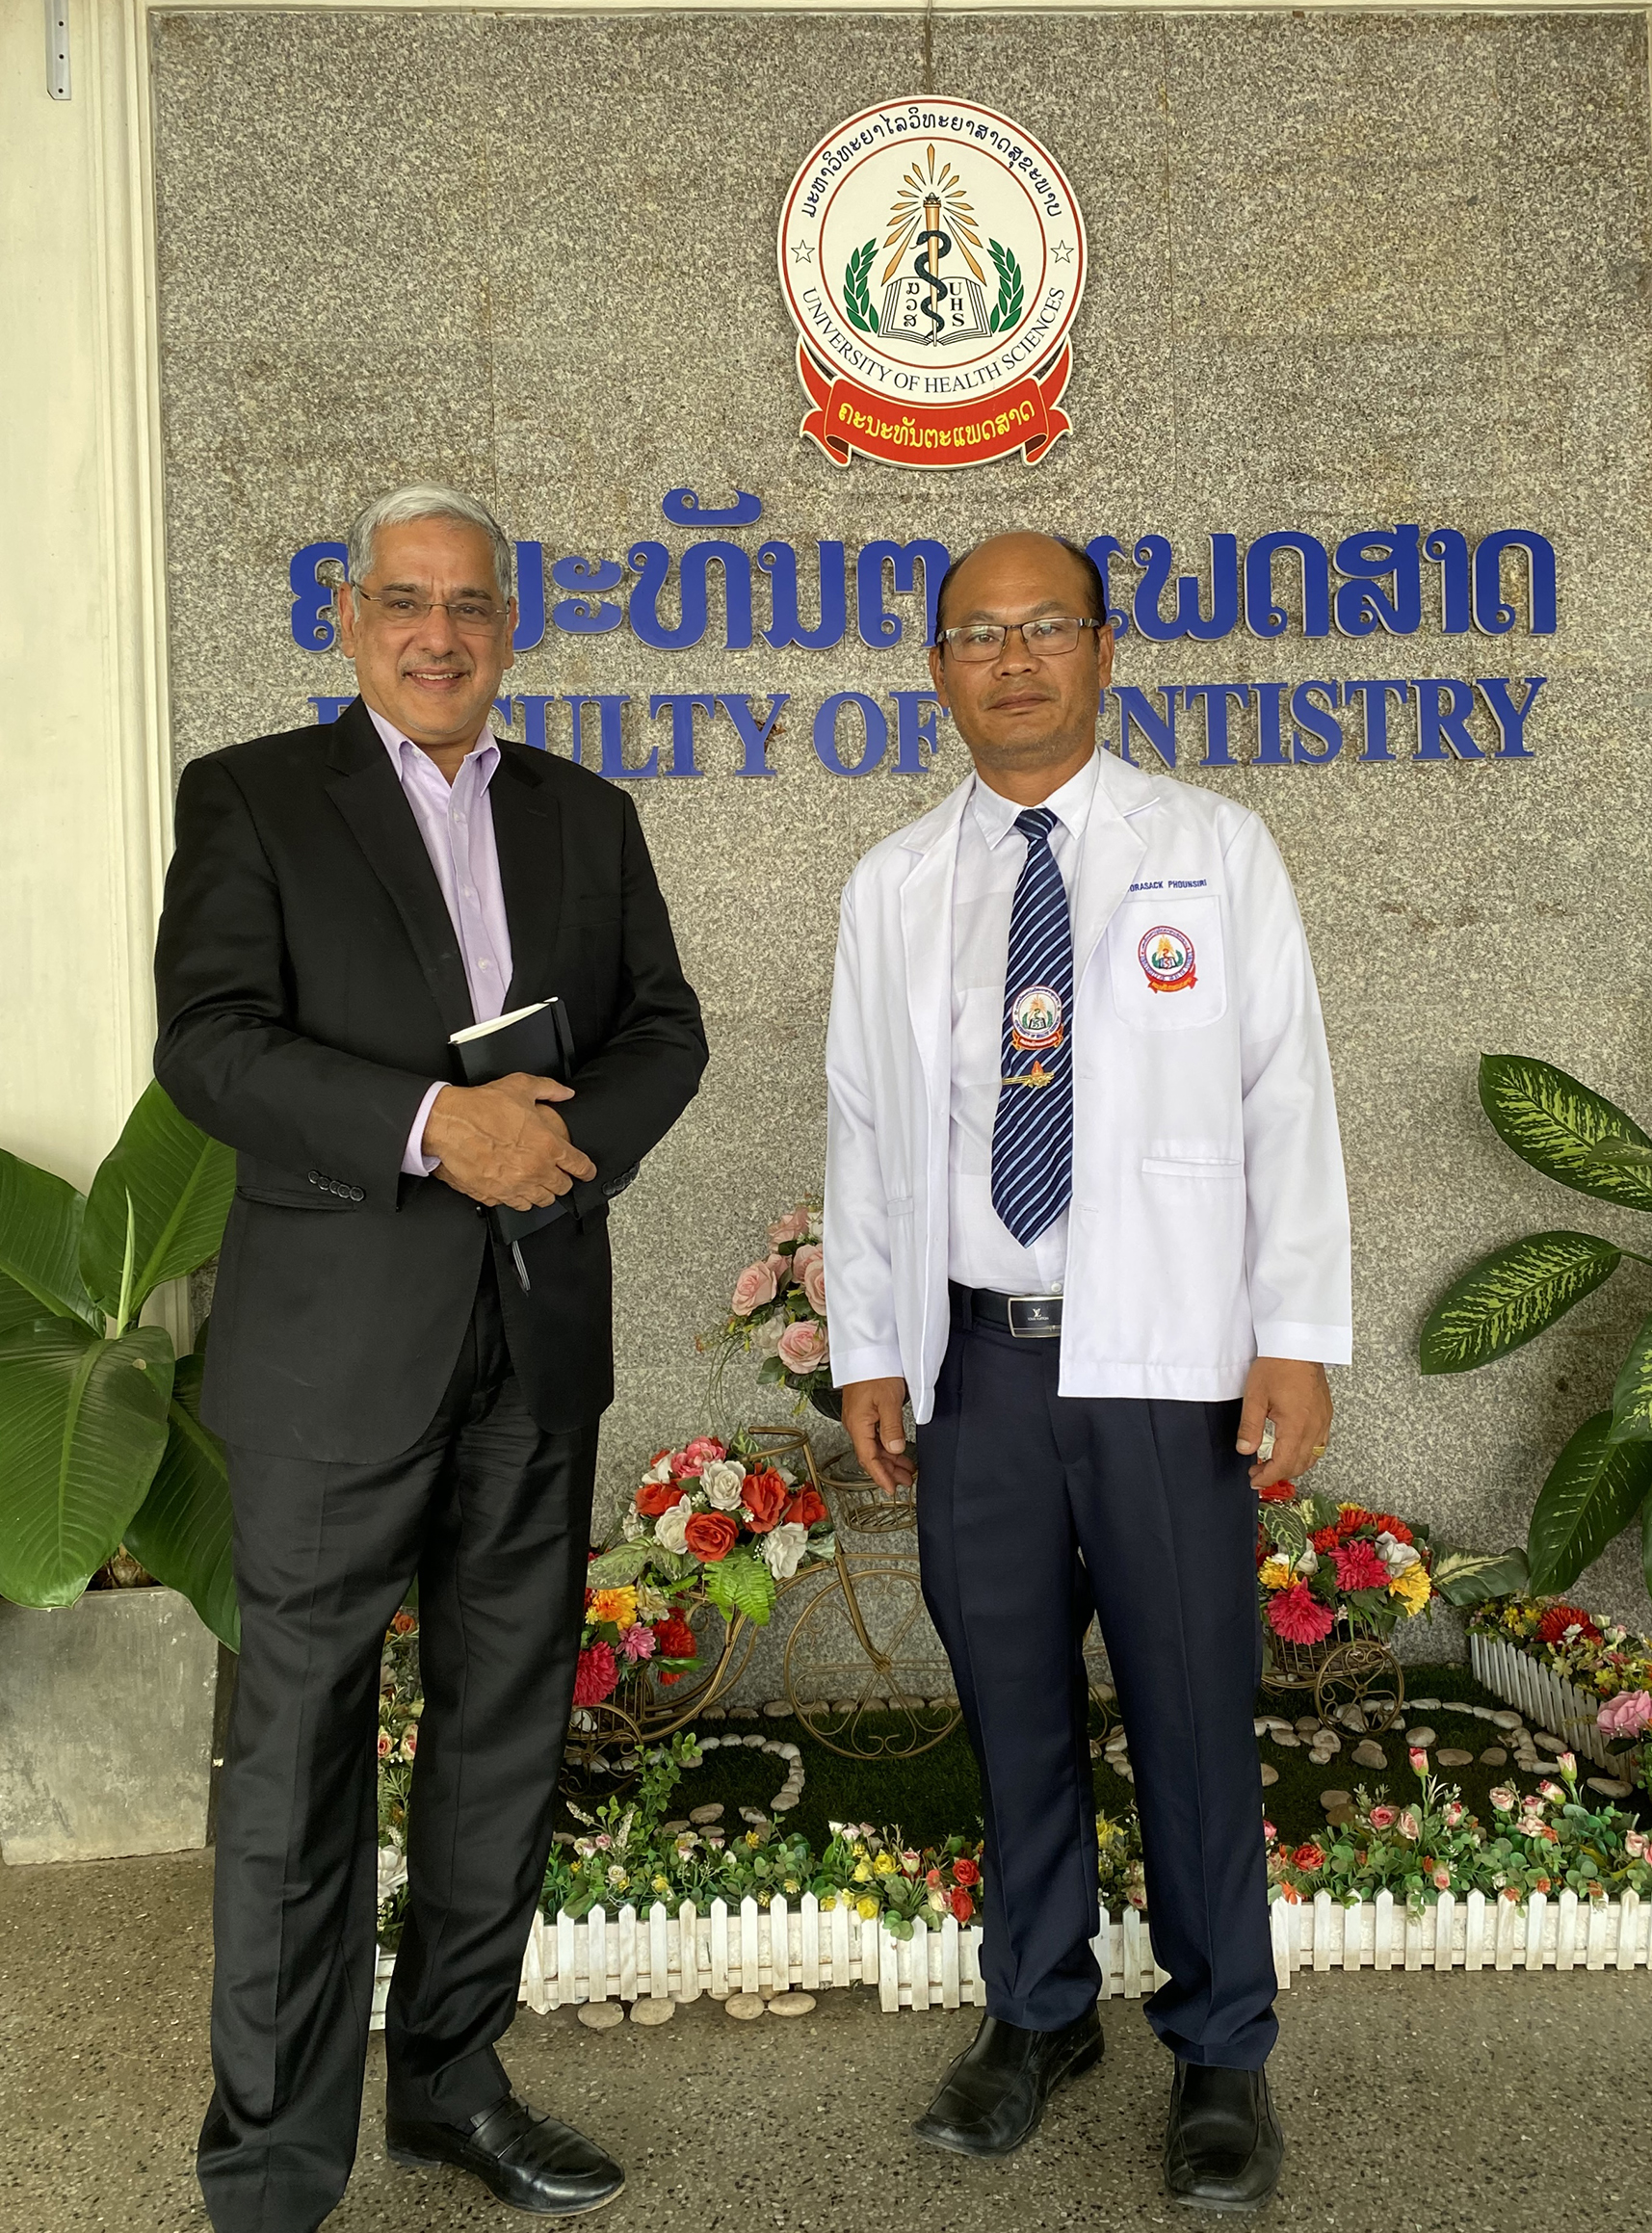 At the University of Health Sciences, LaoPDR